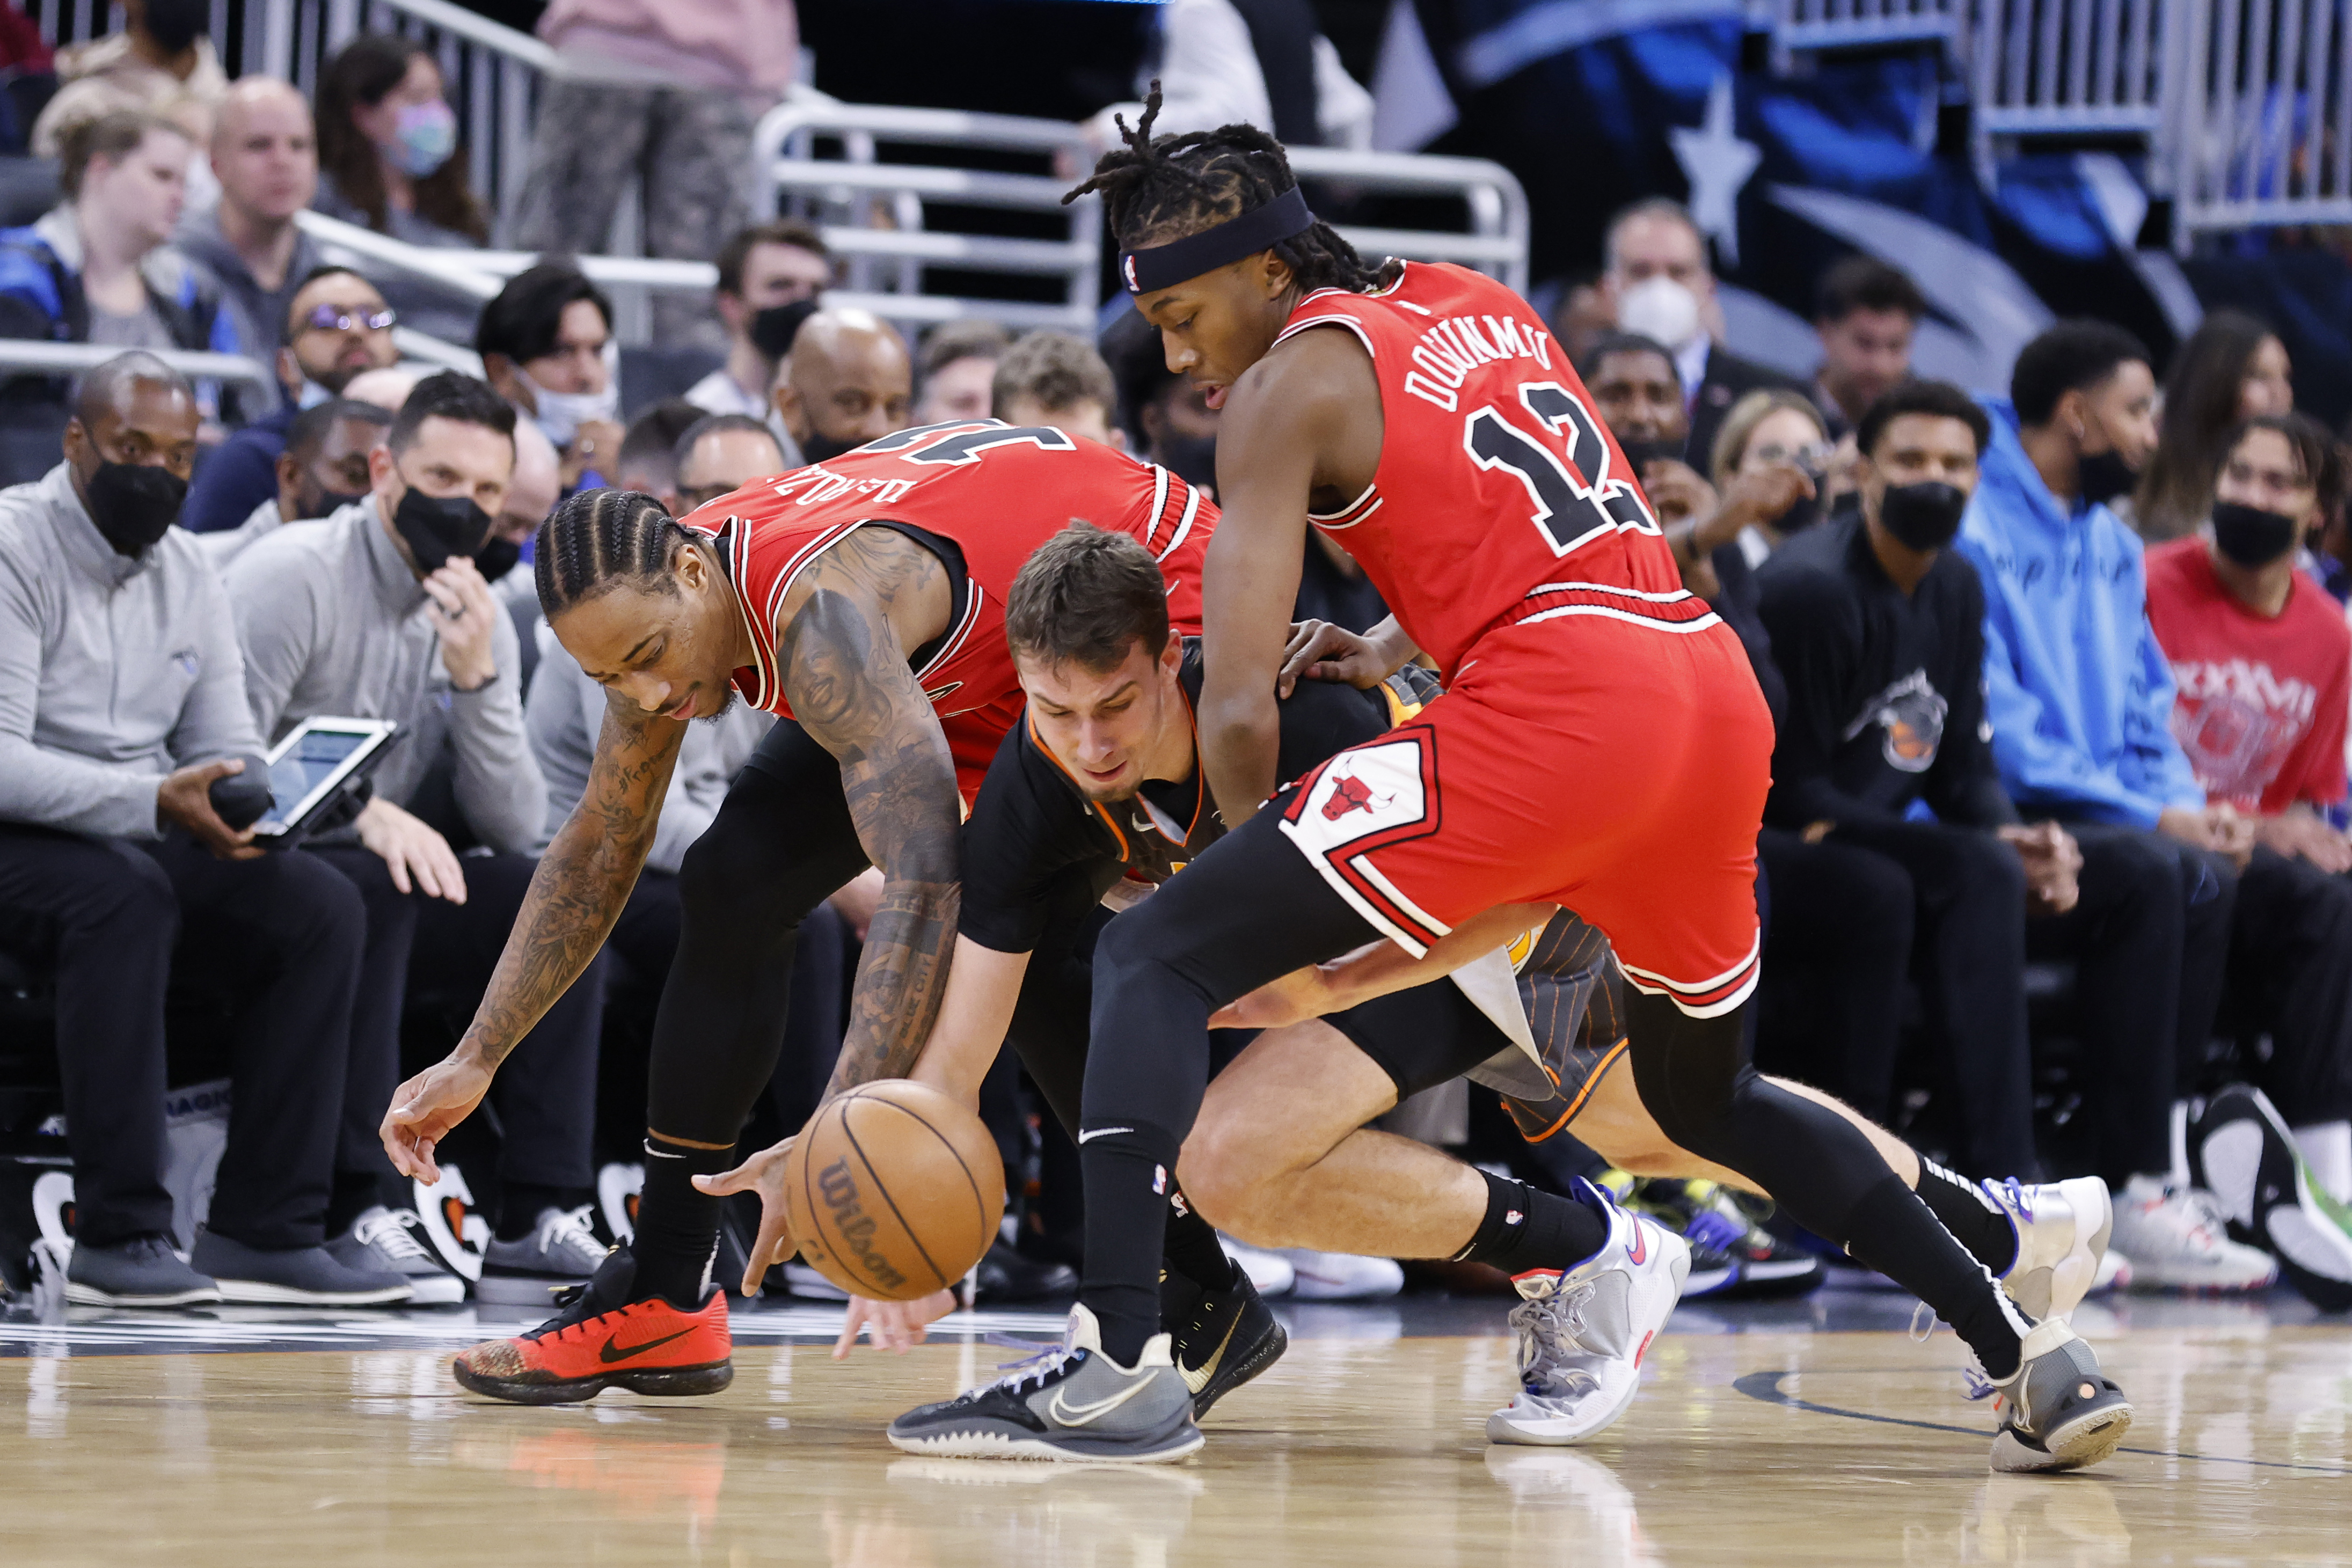 Bulls guard Ayo Dosunmu responds to call to be 'go guy' on the